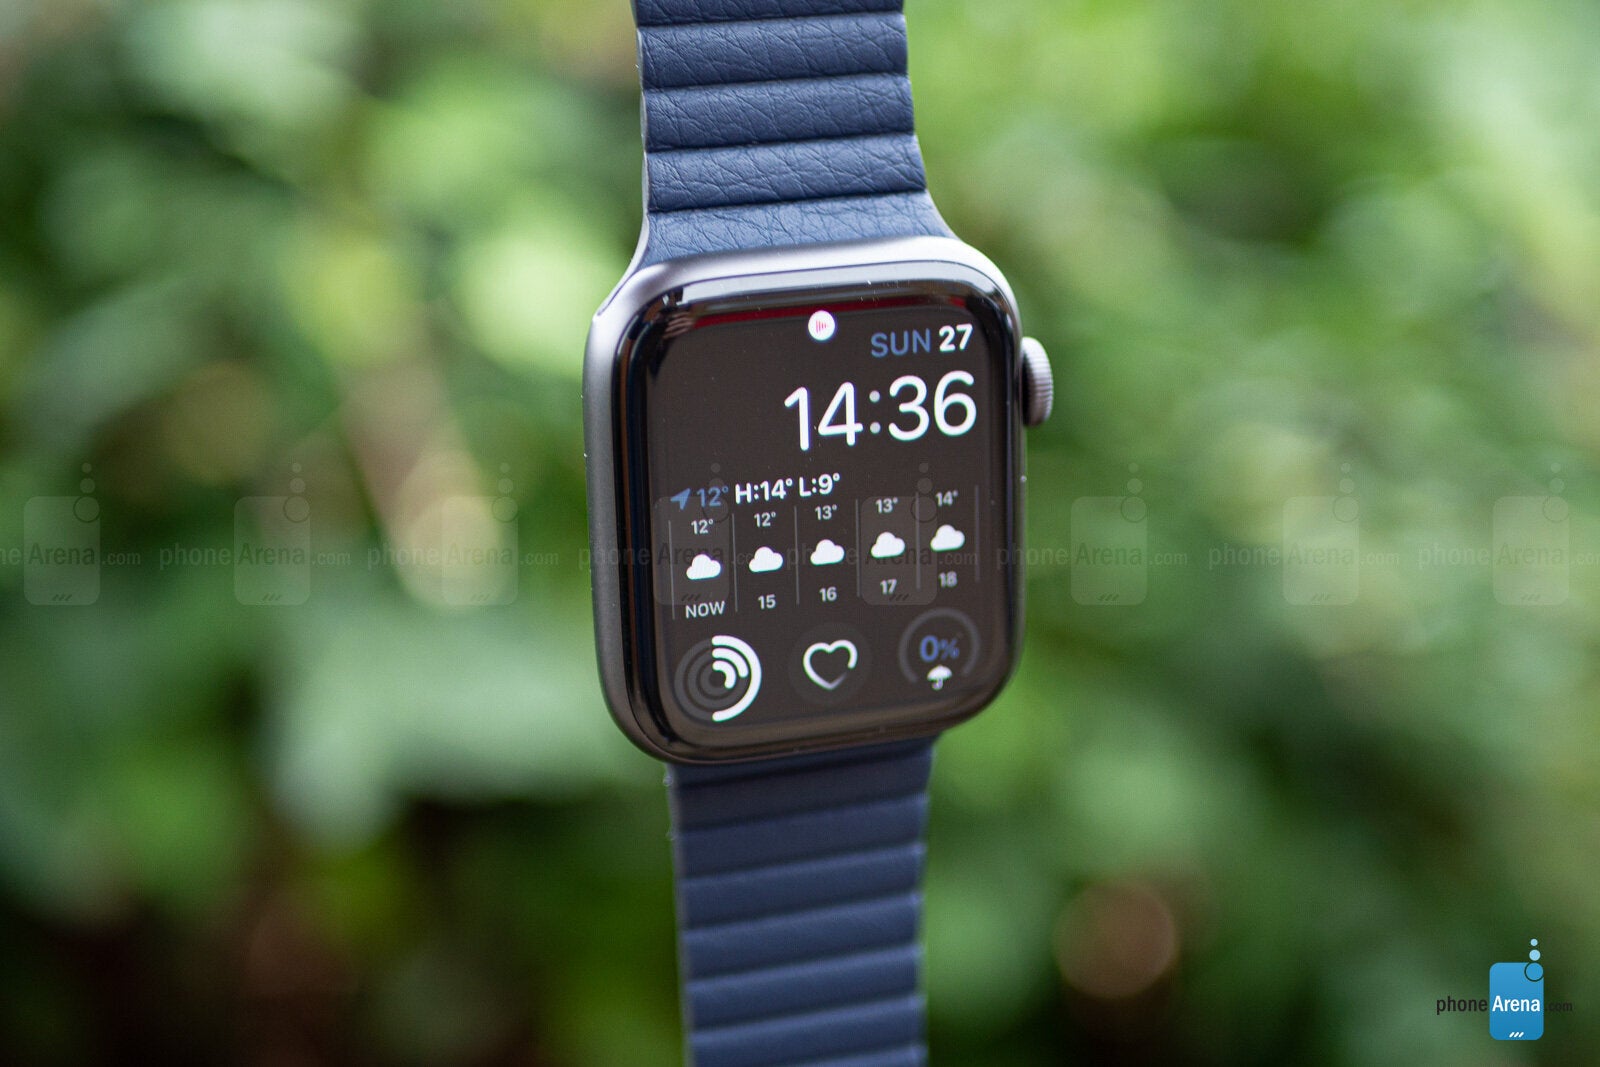 The successor to the Apple Watch Series 6 will be unveiled very soon - Larger screen sizes expected for the new Apple Watch Series 7 models